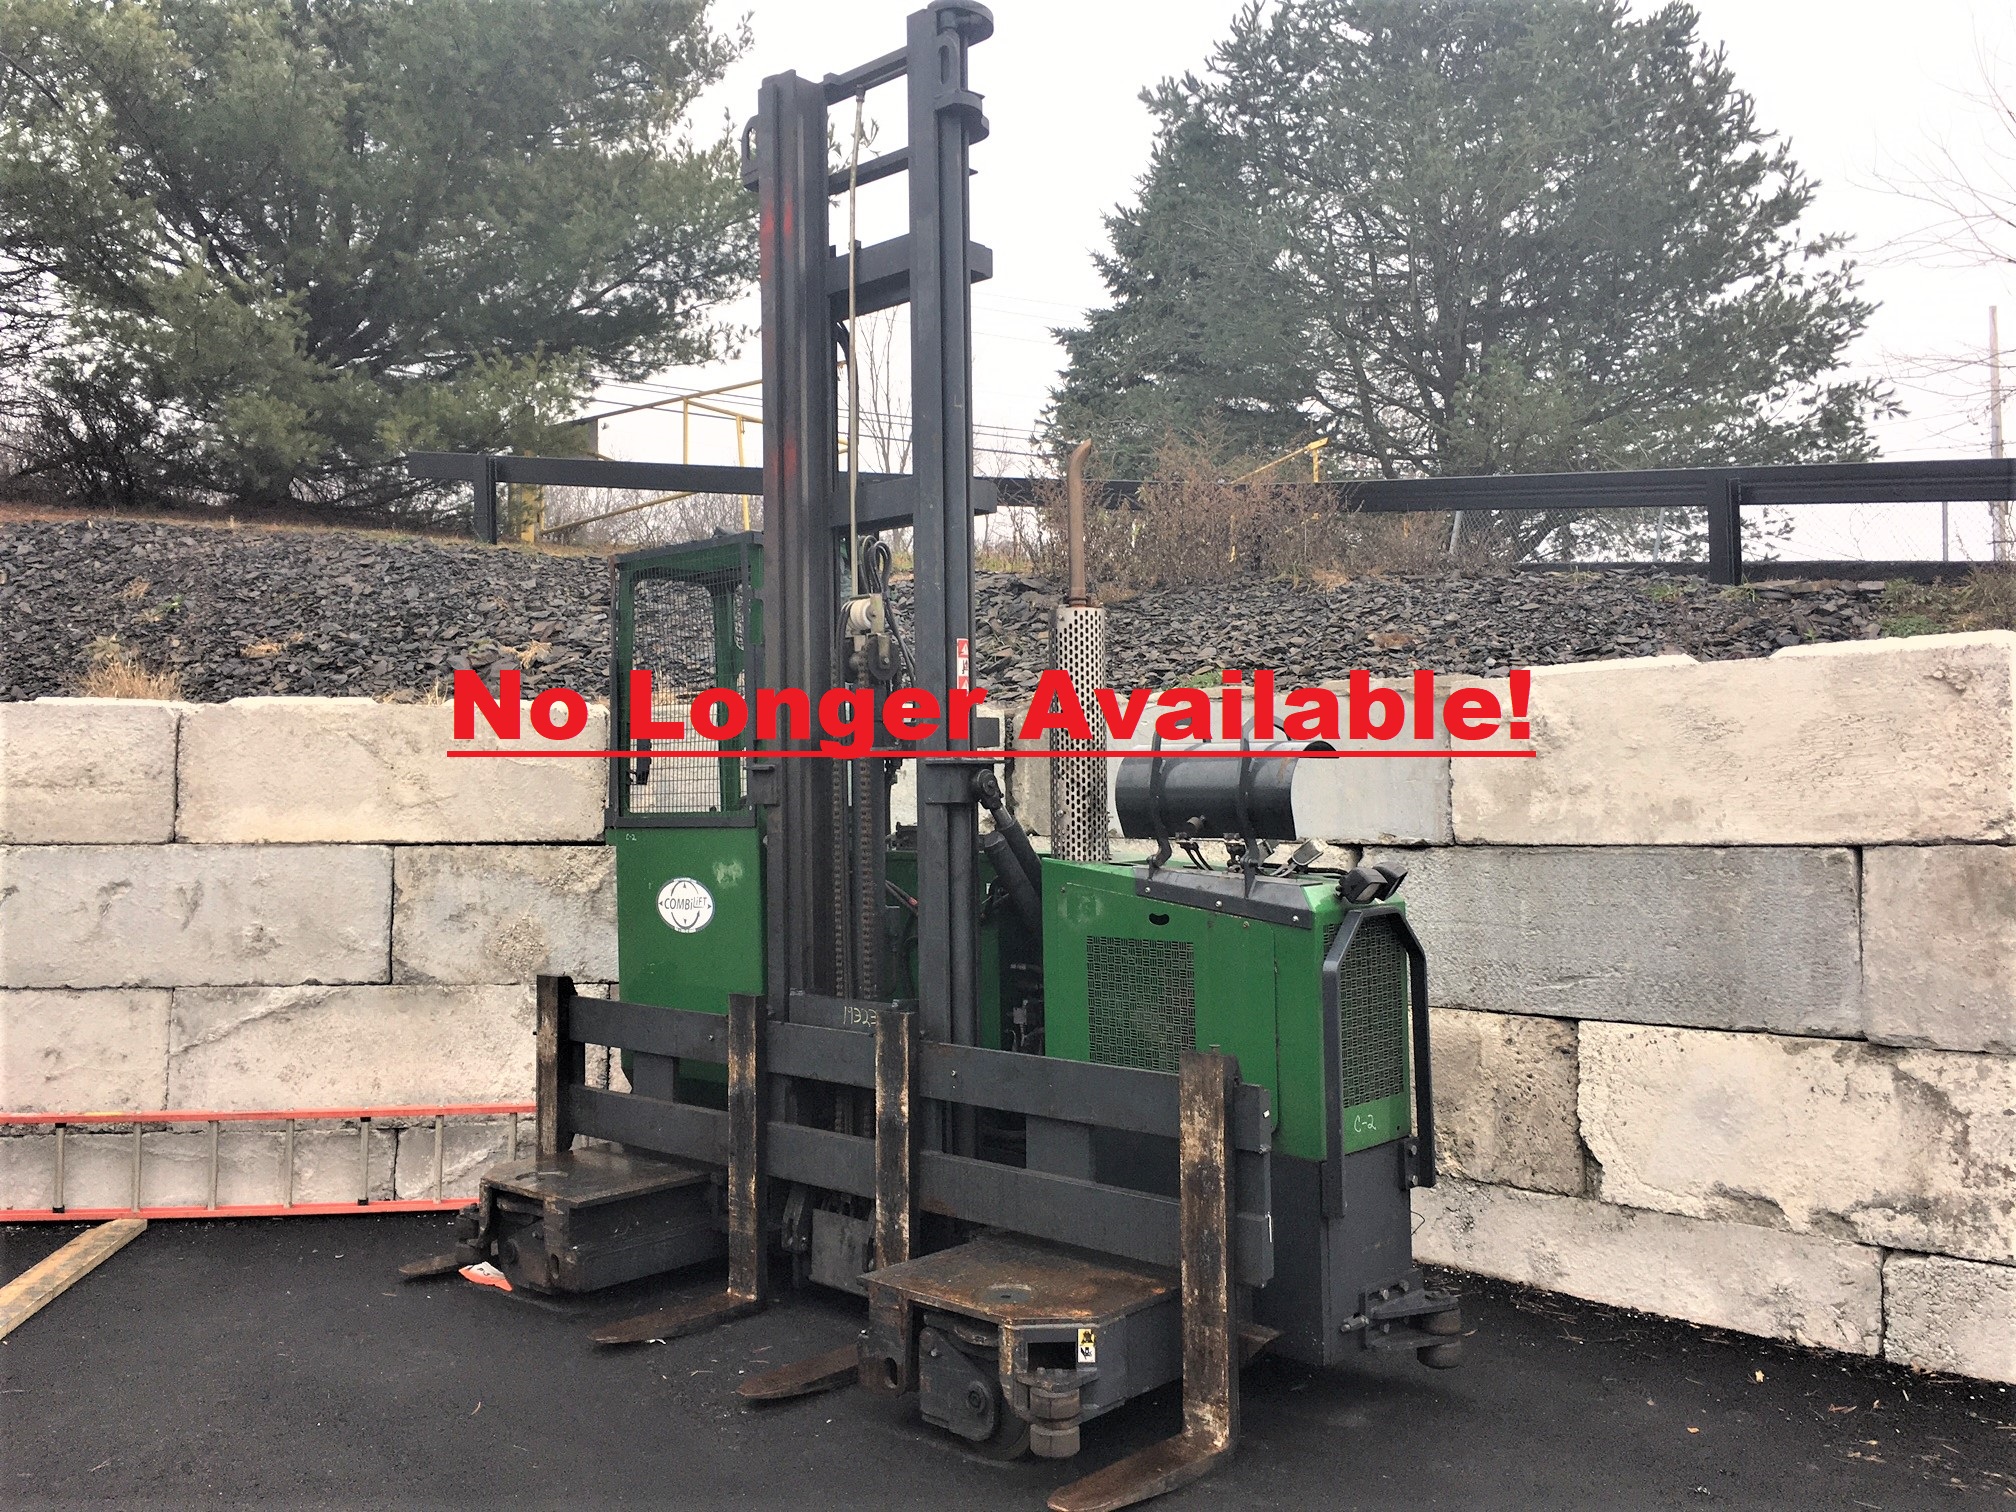 Bi-directional side loading forklift. 2013 Combilift model C10000GT with 2674 hours. 10'000 lb. lift capacity. Fore wheel drive side loader forklift. LPG engine with 159 inch two stage mast, 154 inch wide carriage and 4 forks. 17'200 lb. unladen weight.